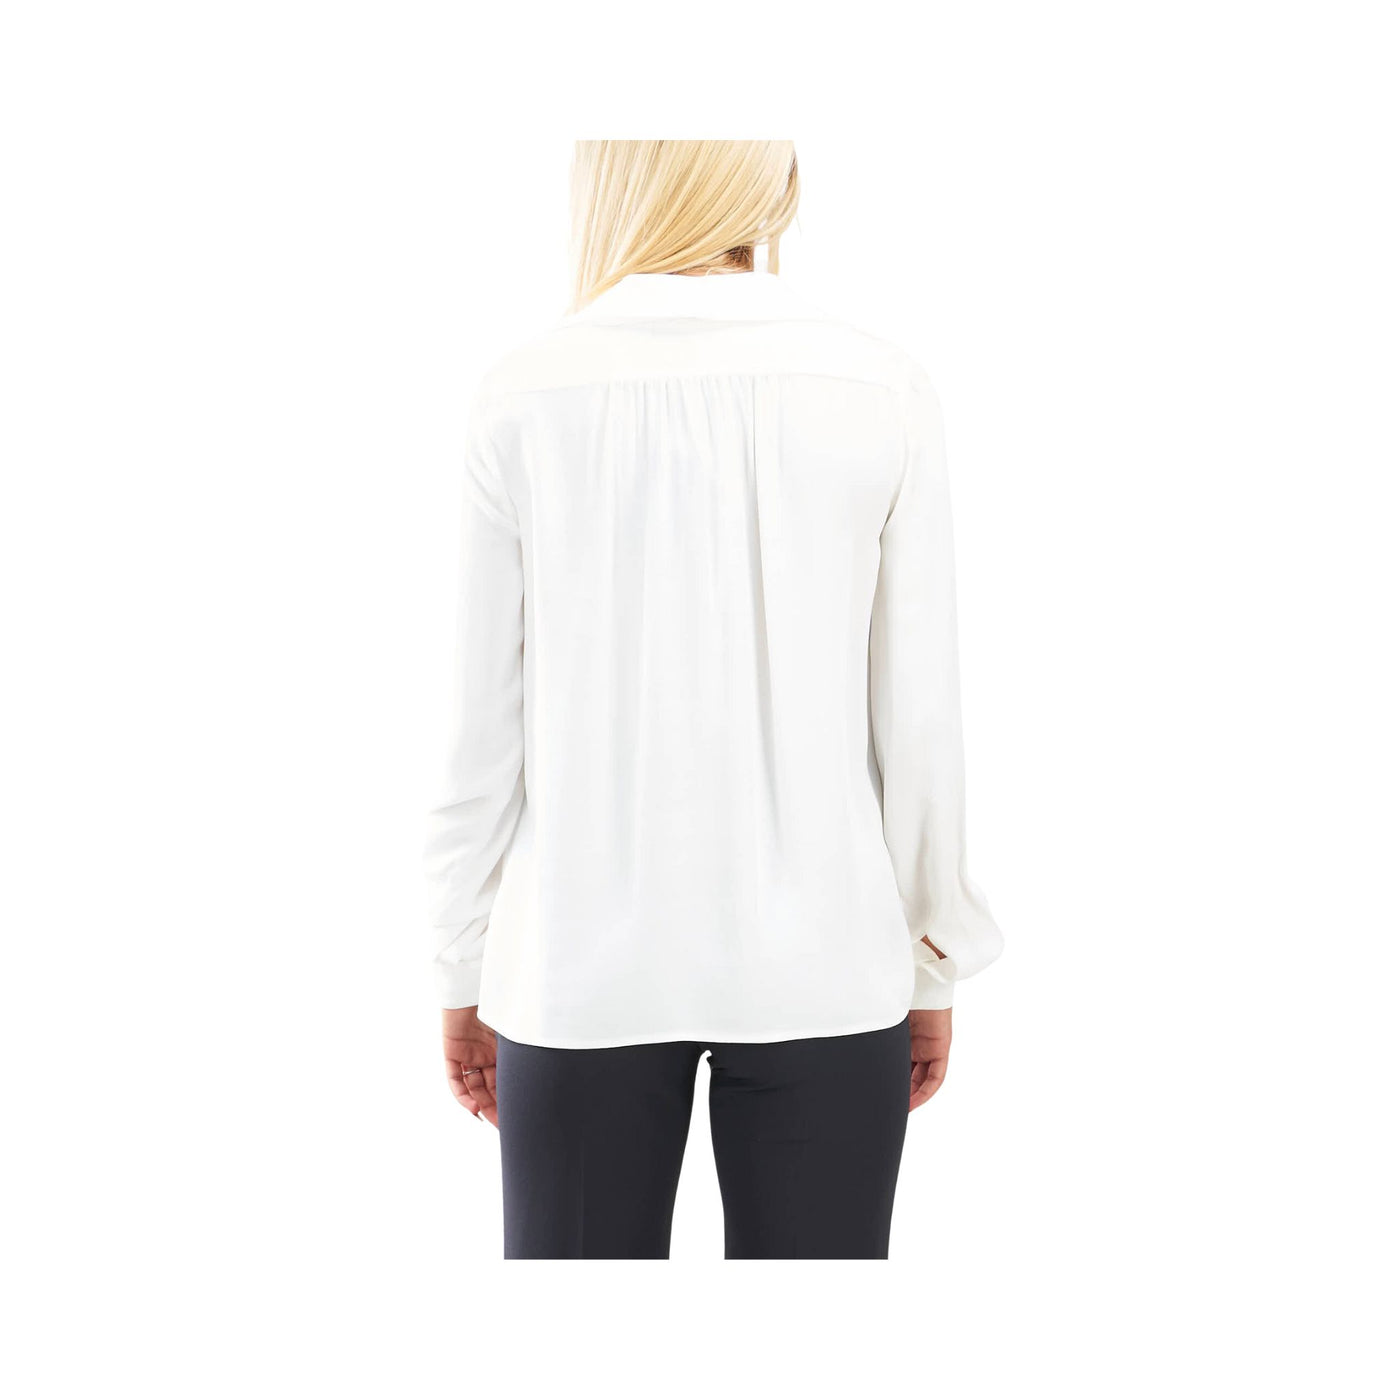 Women's shirt with scarf